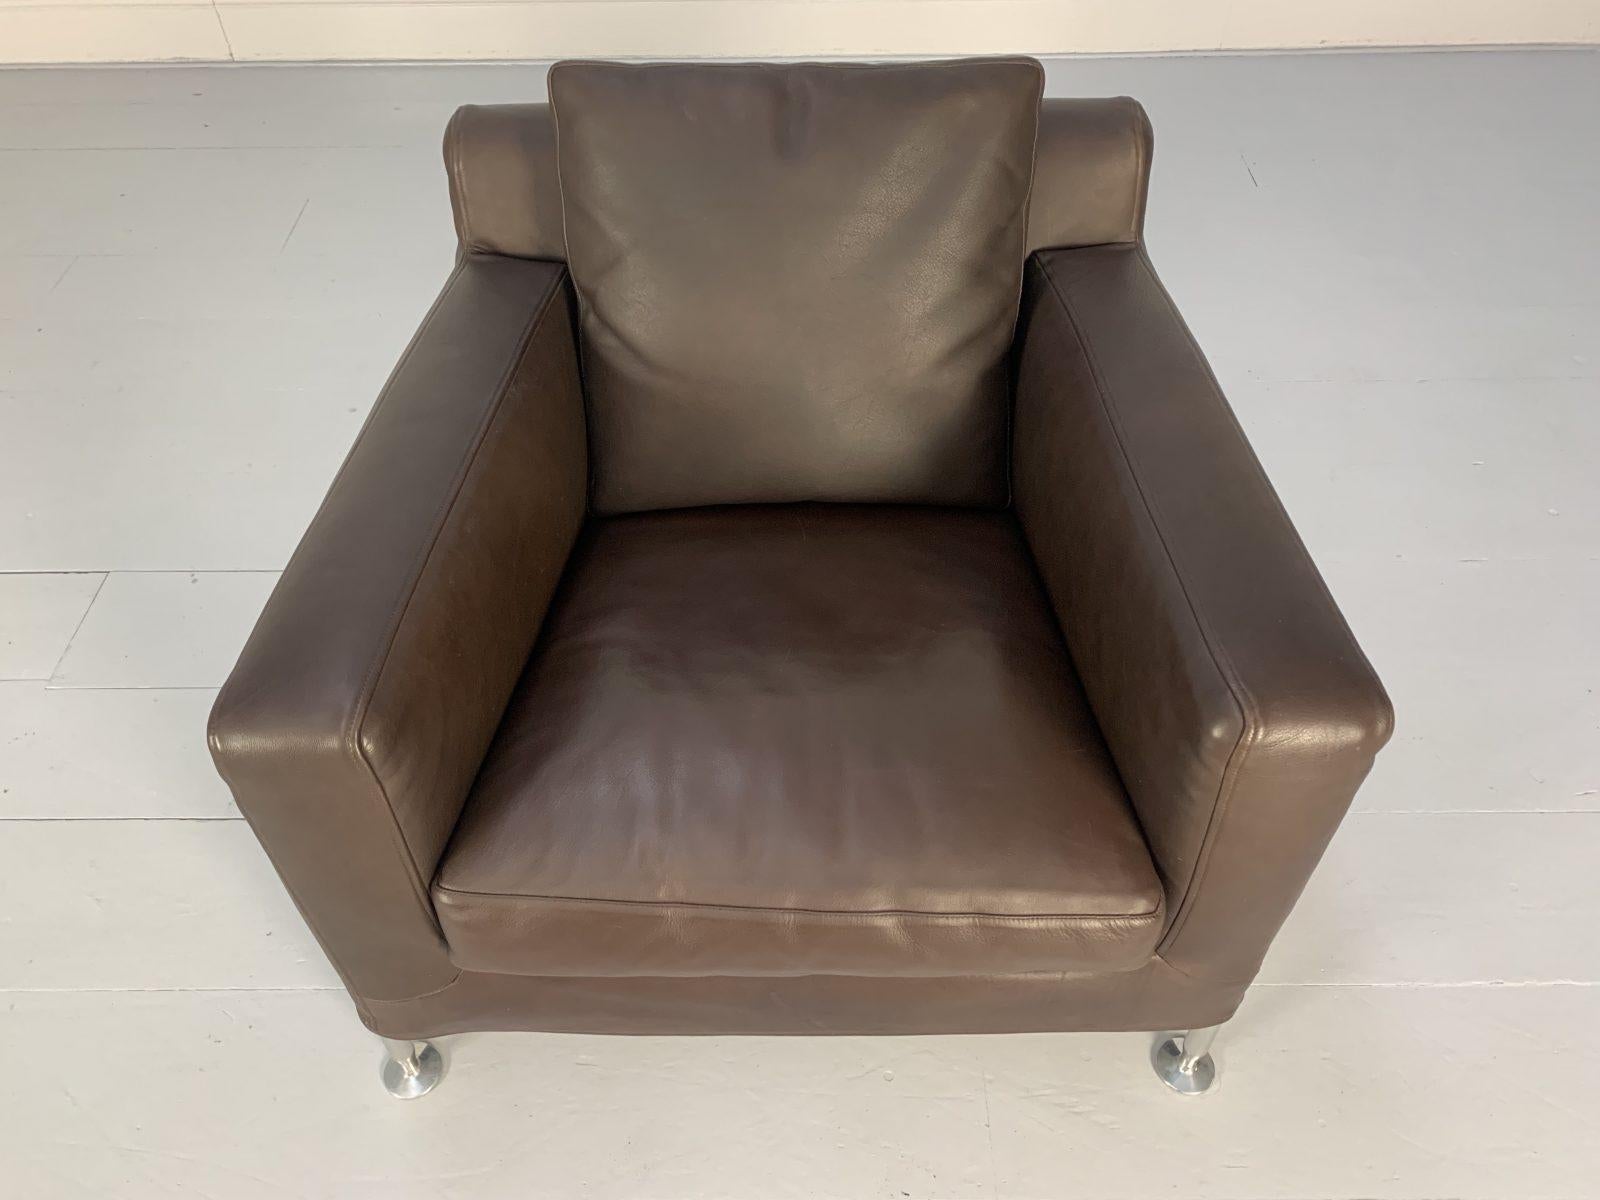 Pair of B&B Italia “Harry H85” Armchairs in Brown “Gamma” Leather For Sale 8